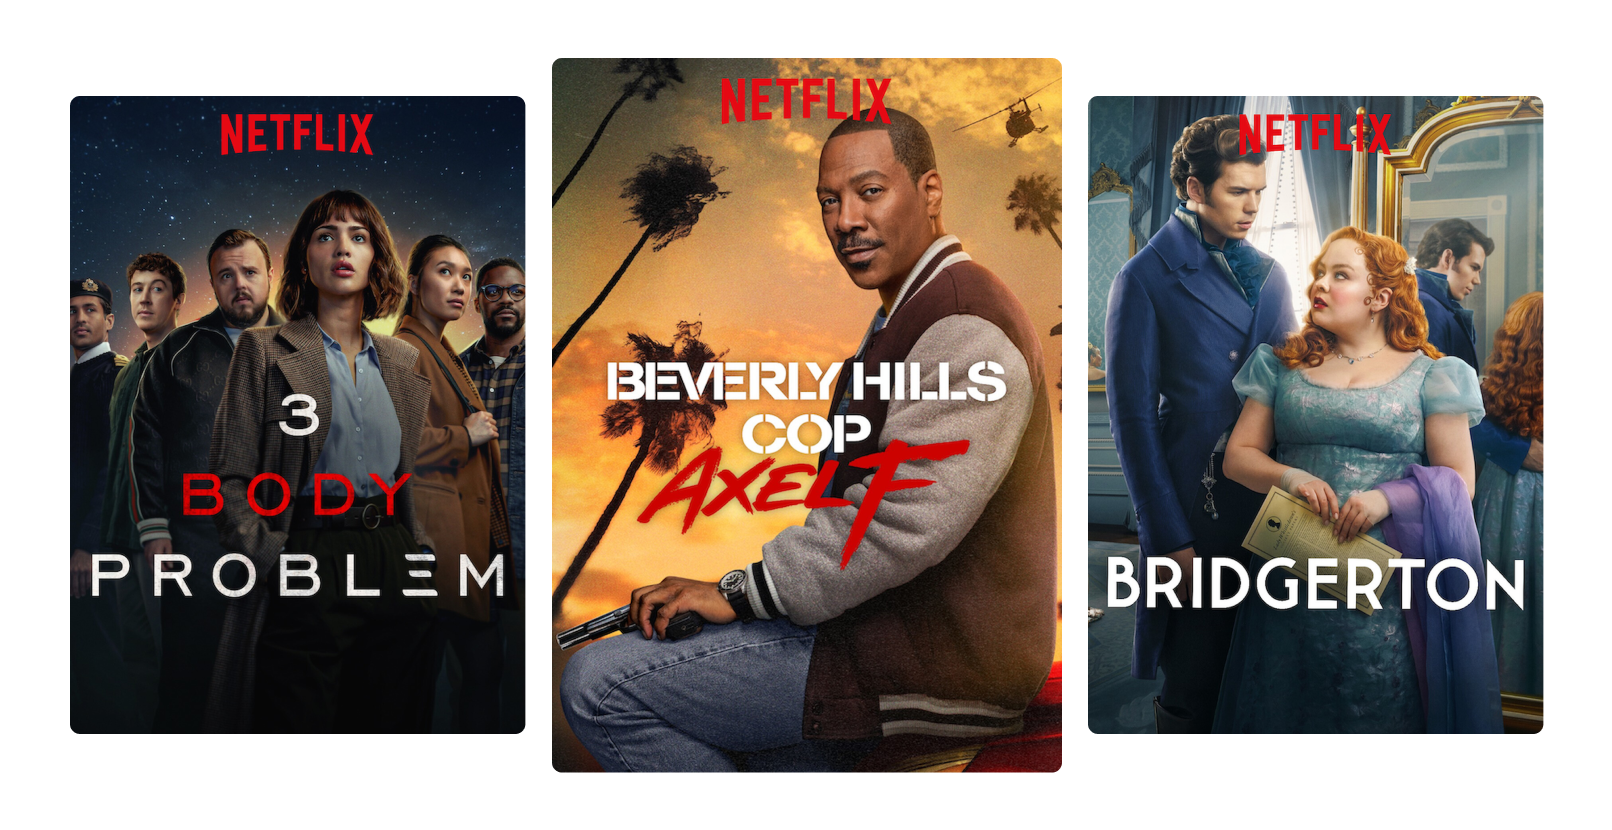 Posters for the Netflix films and series 3 Body Problem, Beverly Hills Cop and Bridgerton.